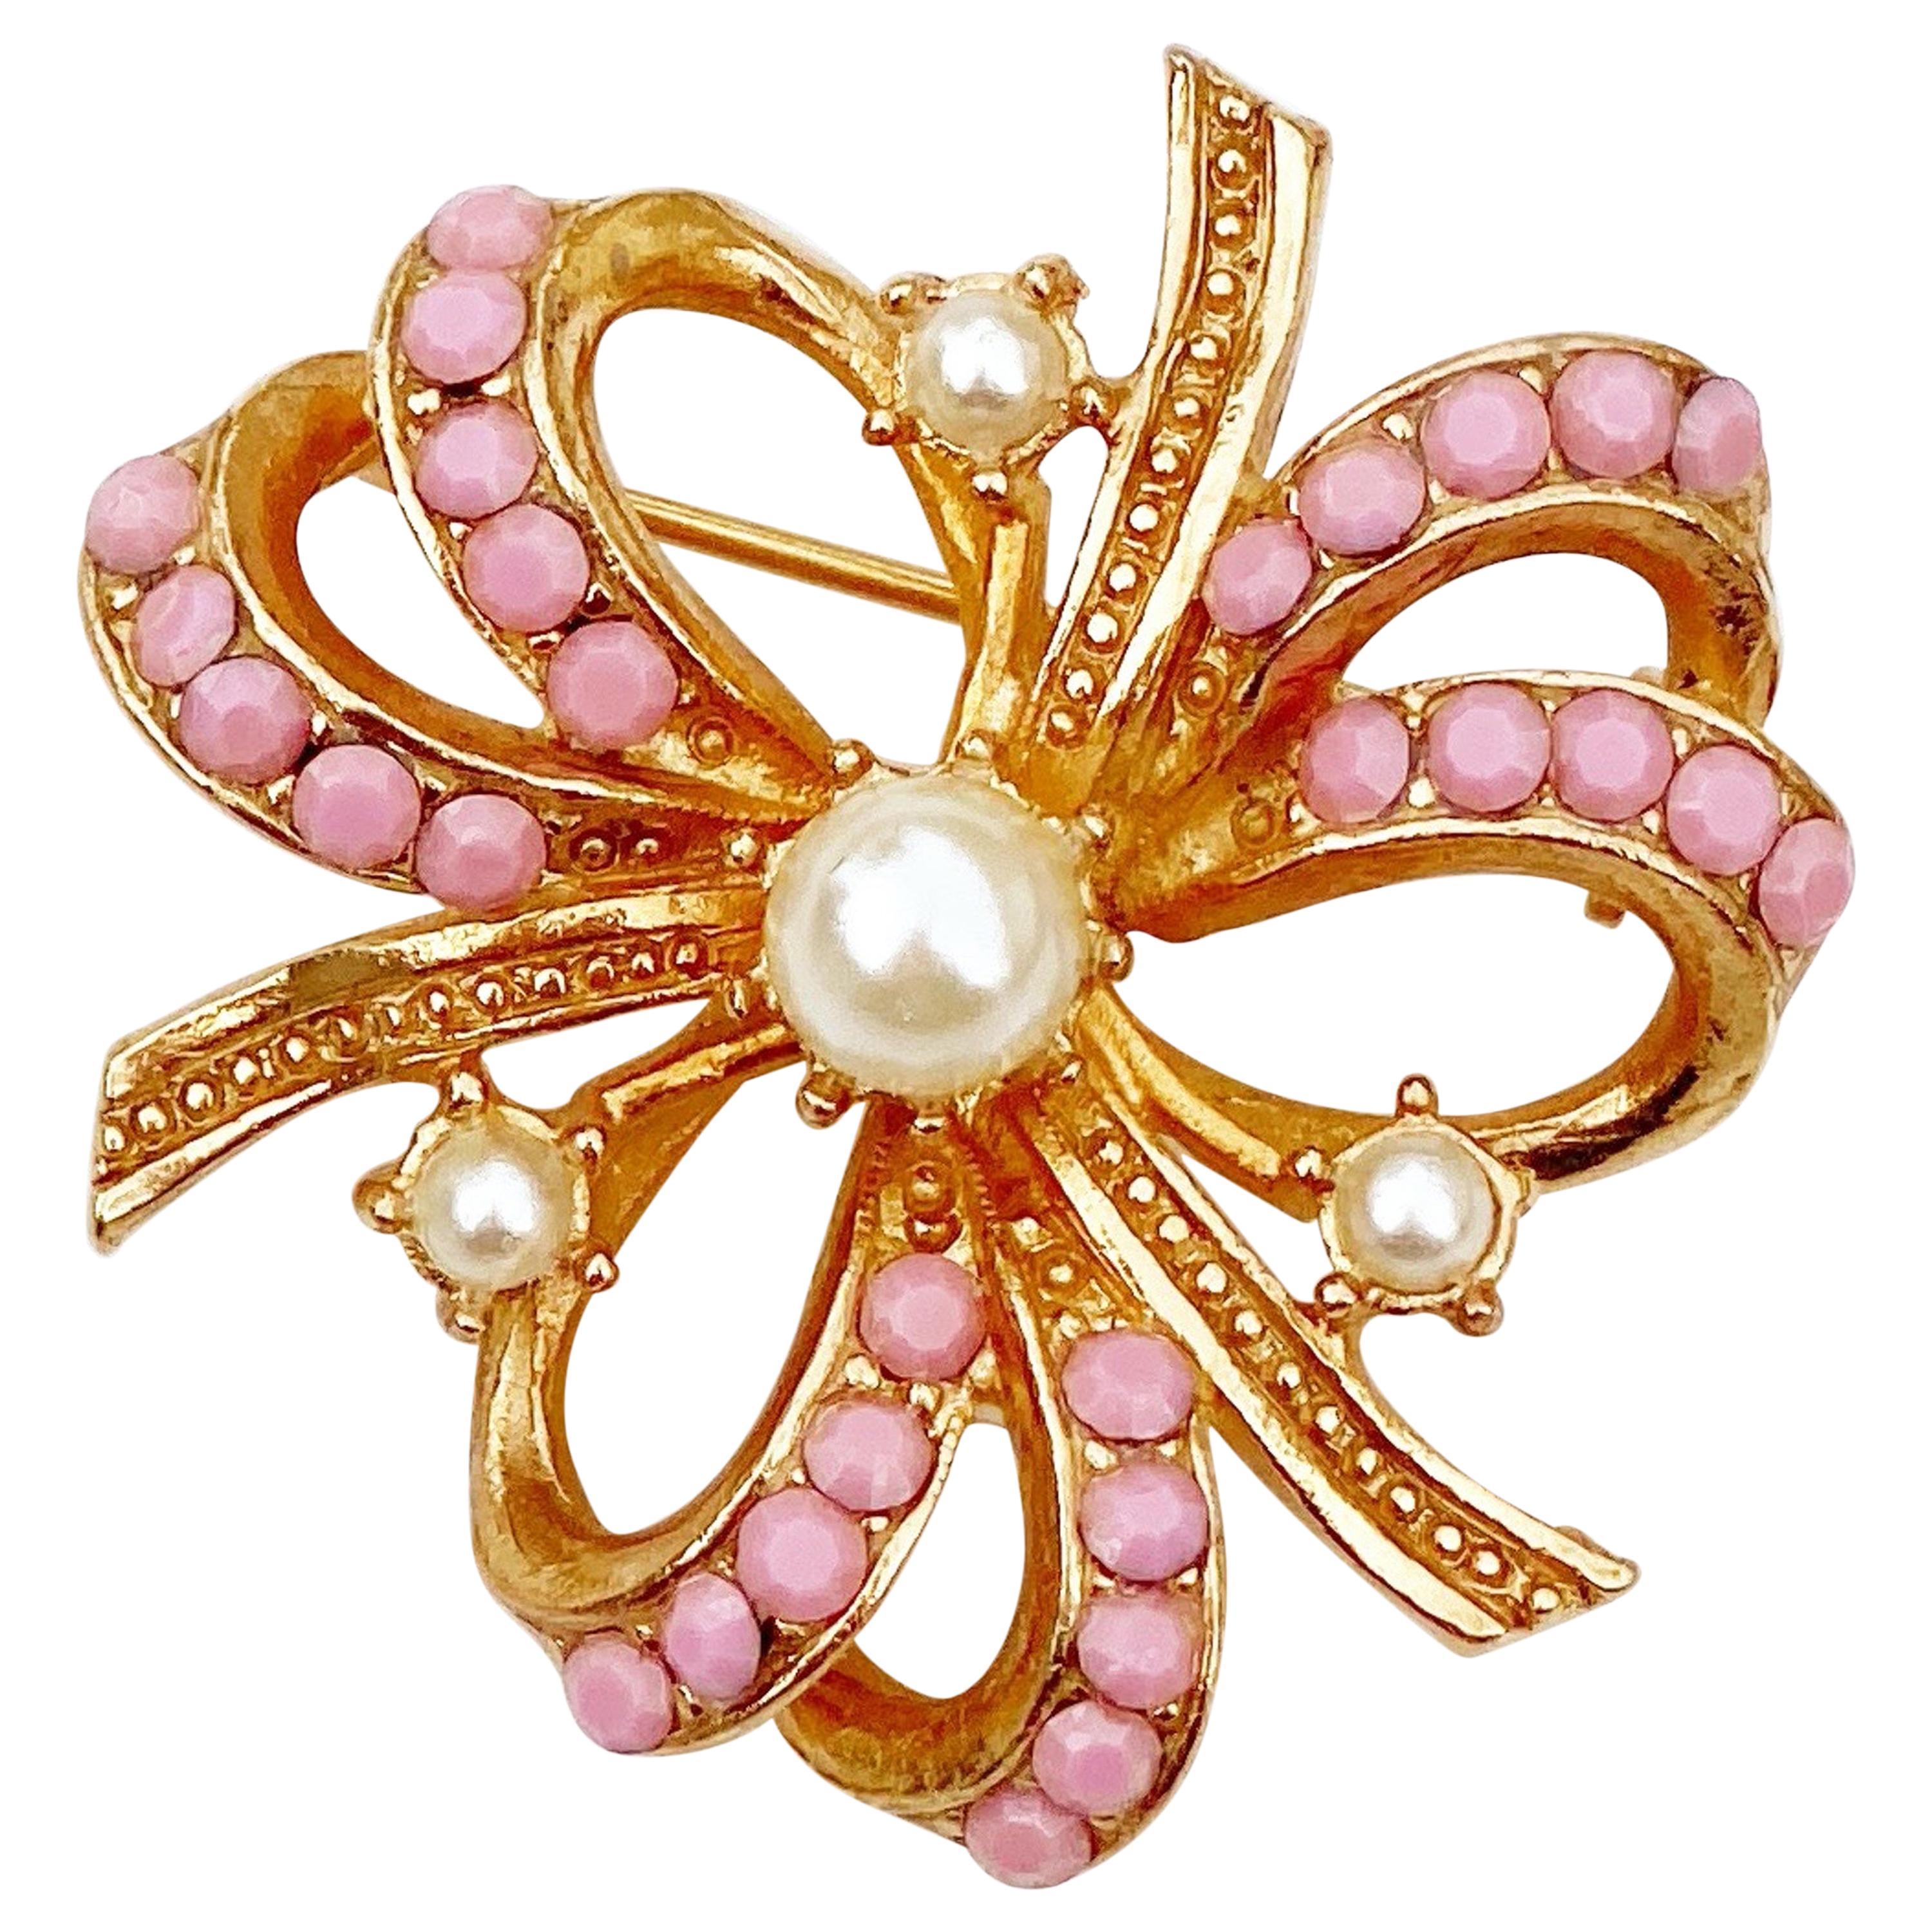 Gilt & Pastel Pink Rhinestone Bow Brooch With Pearl Accents By Hollycraft, 1950s